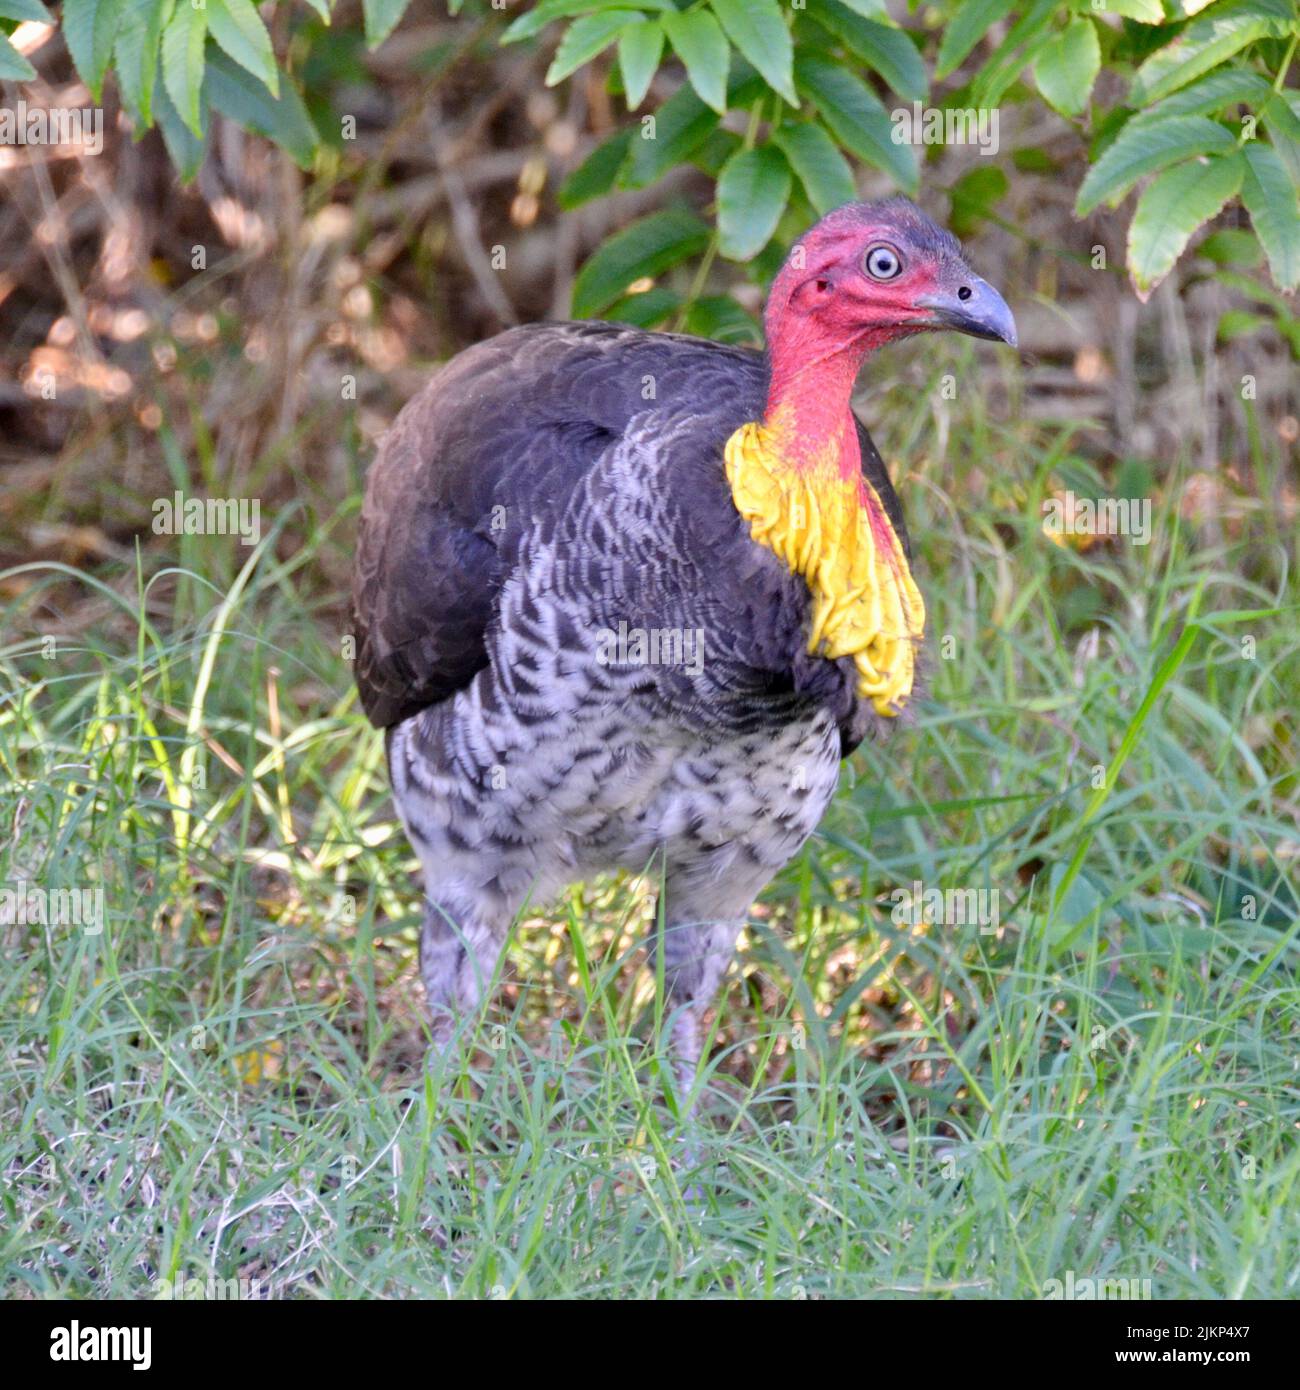 One brightly coloured male bush turkey in Noosa, Australia, has a red head and yellow neck with speckled leg feathers and is a wild bird. Stock Photo